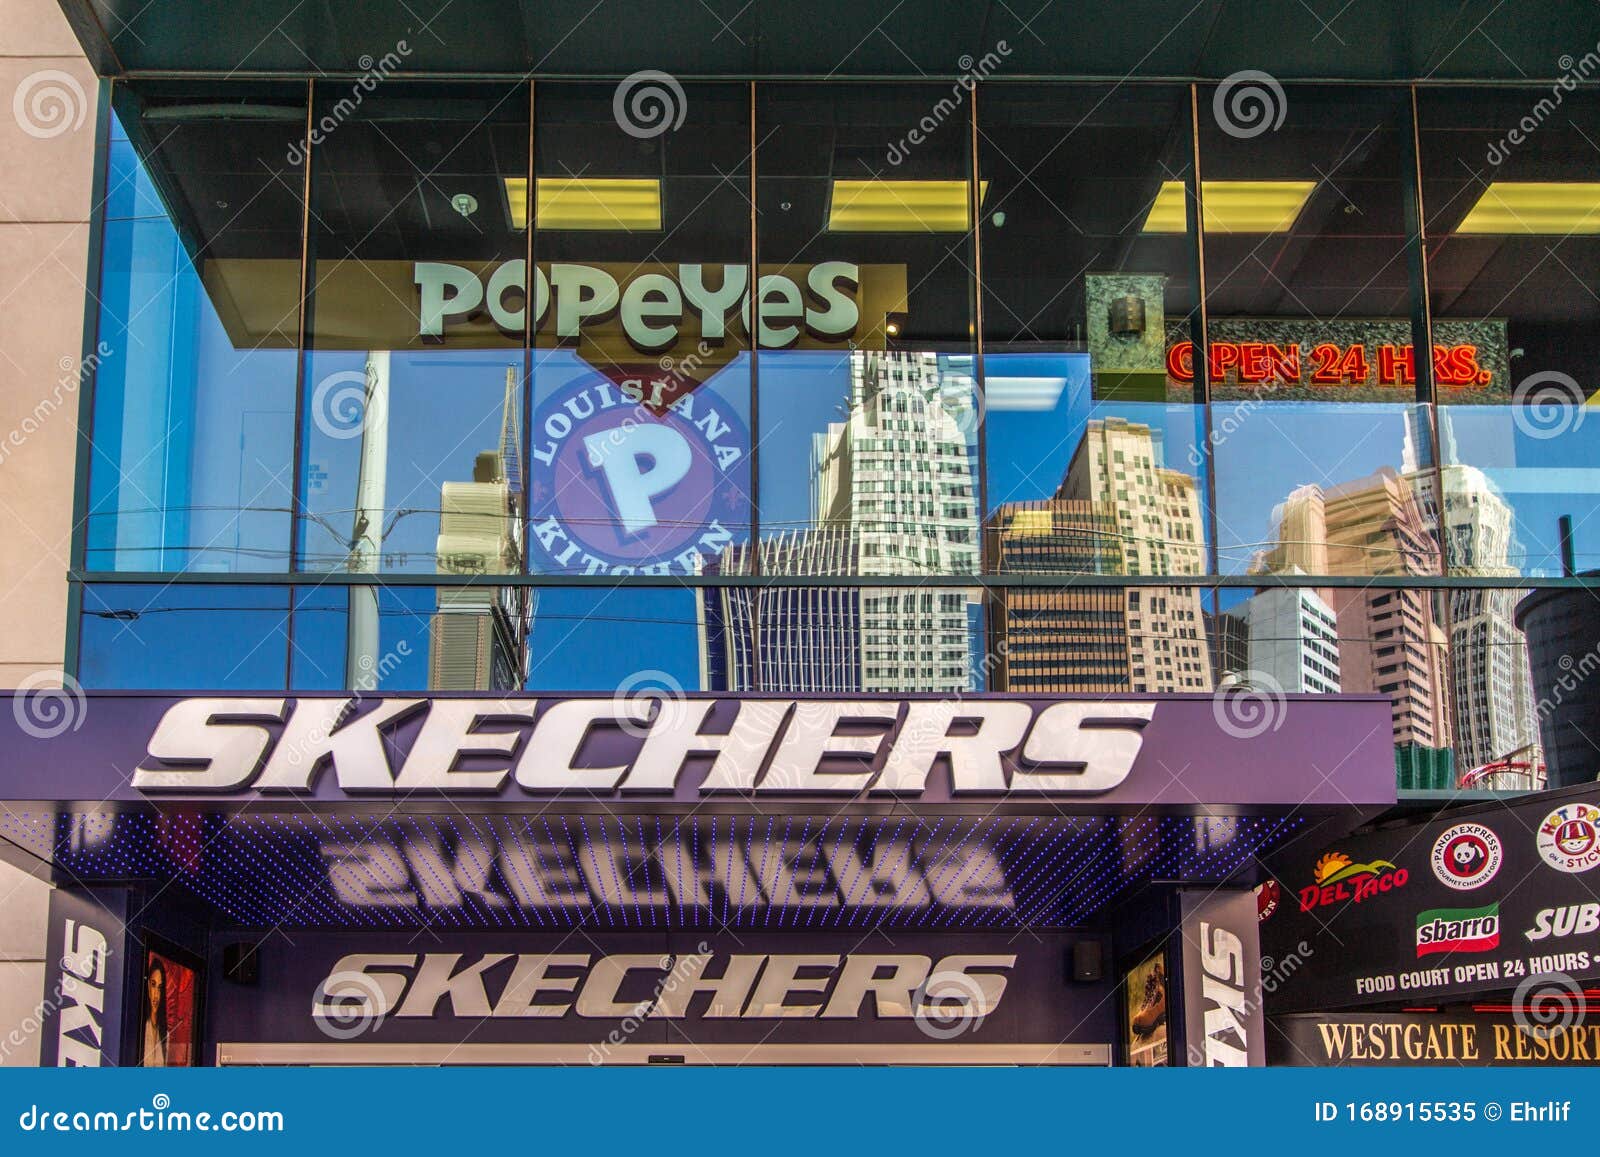 Skechers And Popeyes Storefront On Las Vegas Strip Editorial Image - Image of city, franchise ...